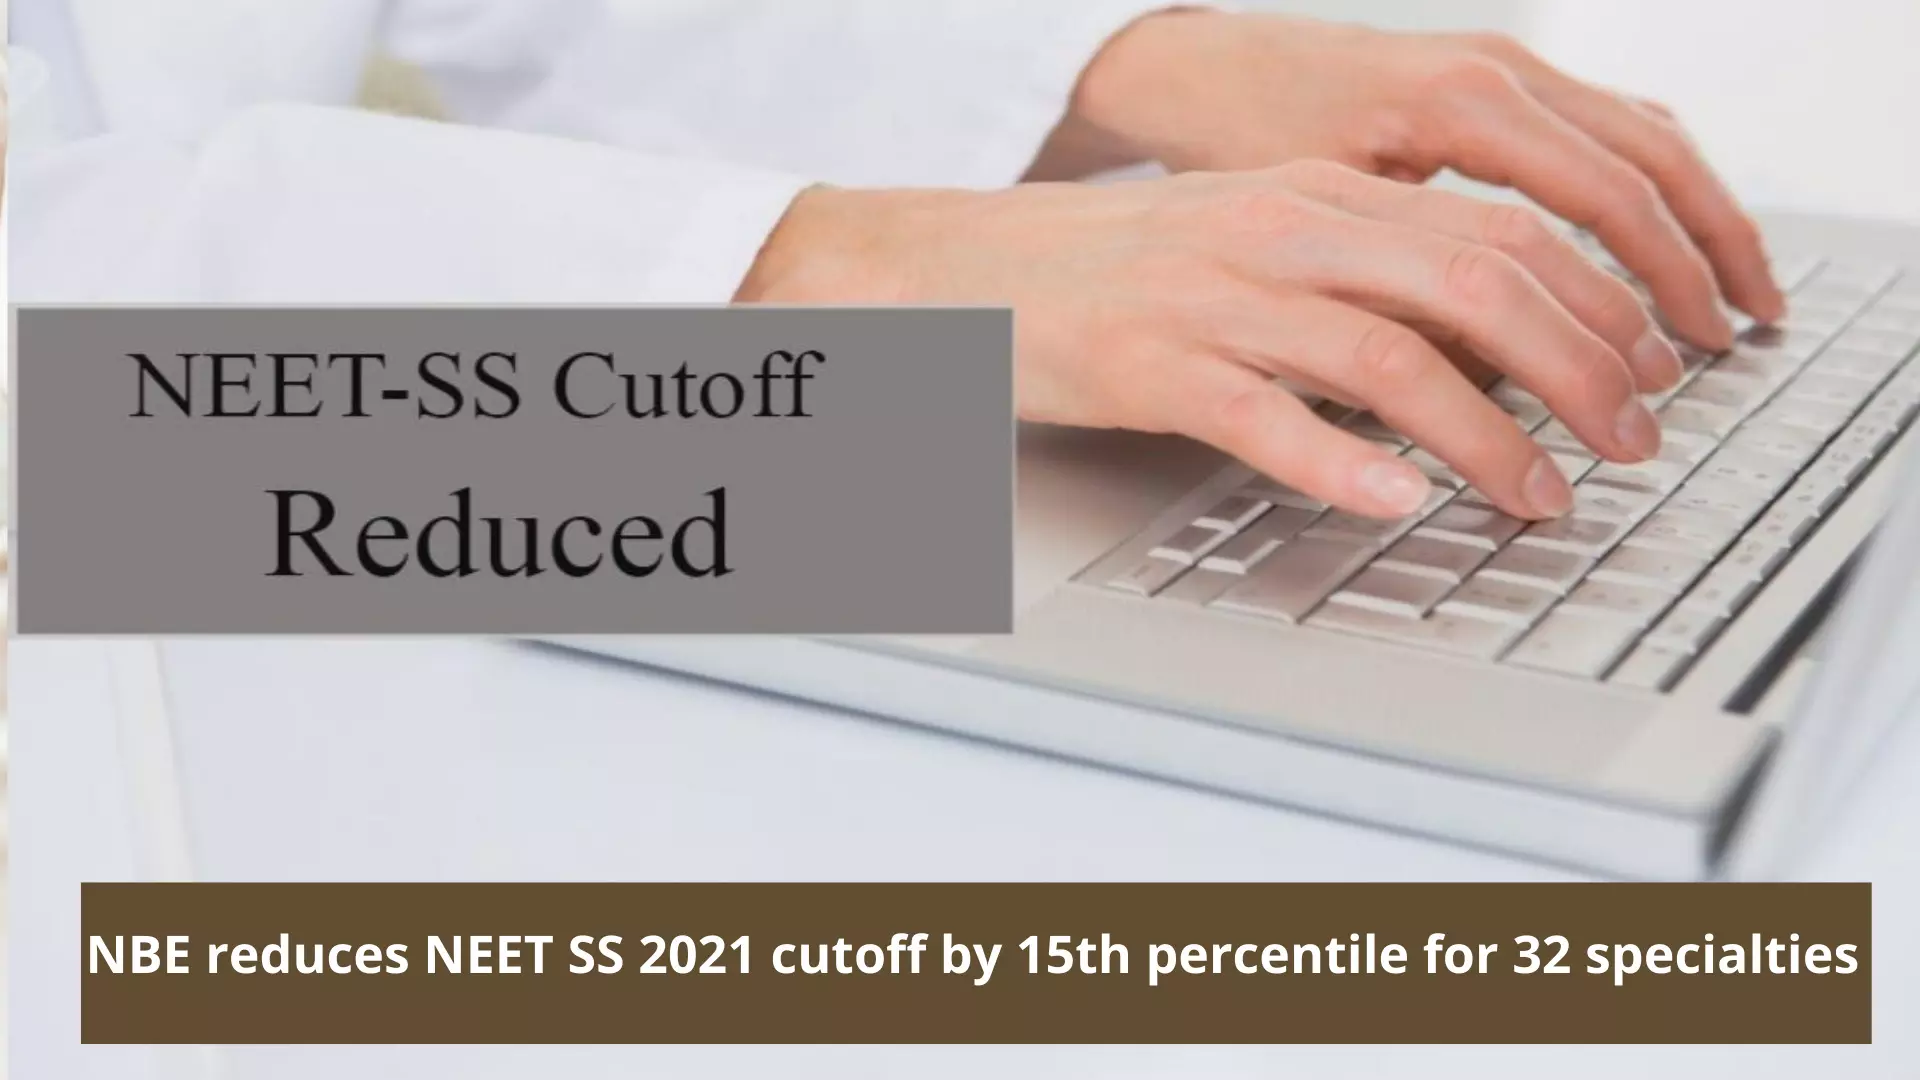 NEET SS 2021 cutoff reduced by 15 percentile for 32 specialities